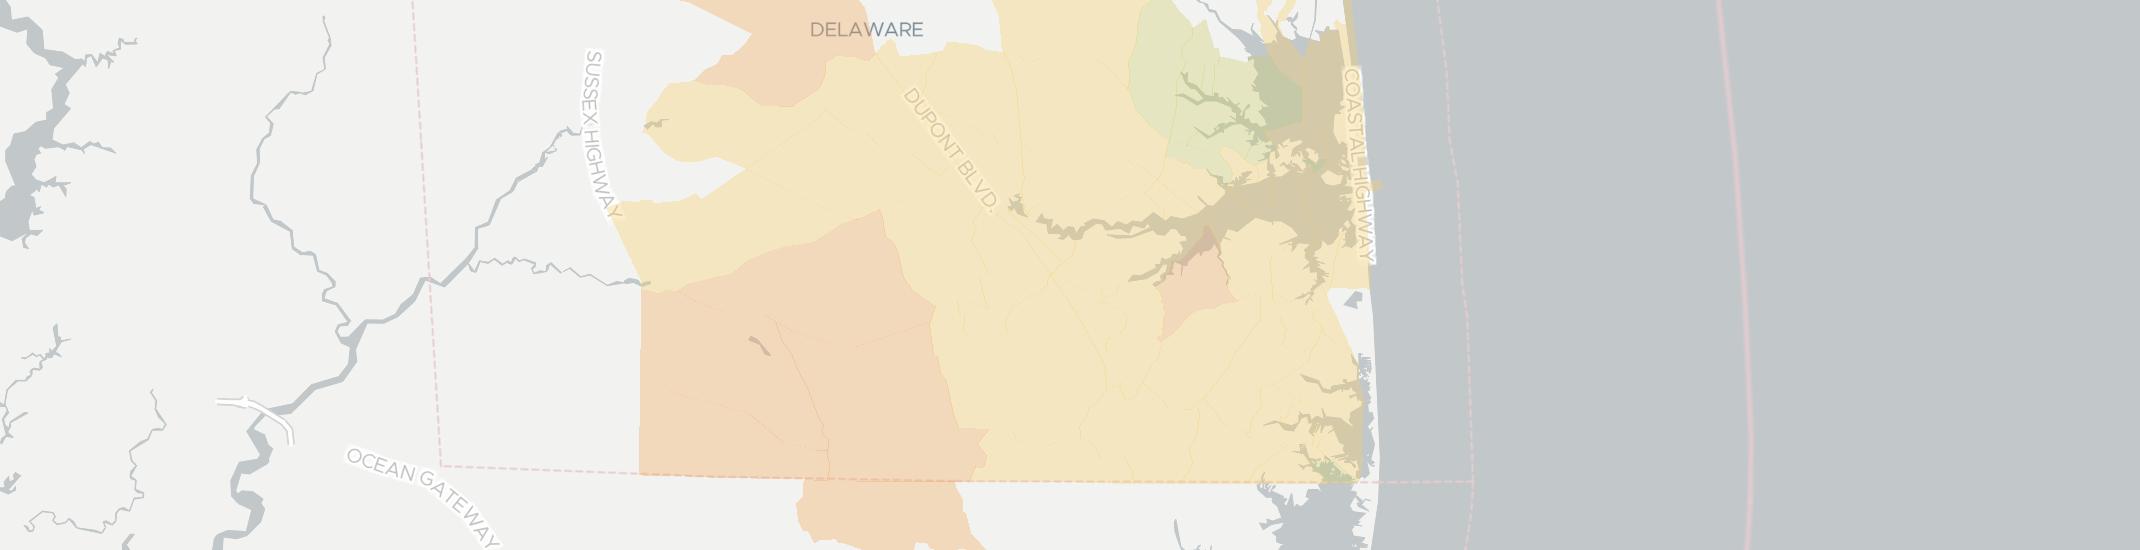 Millsboro Internet Competition Map. Click for interactive map